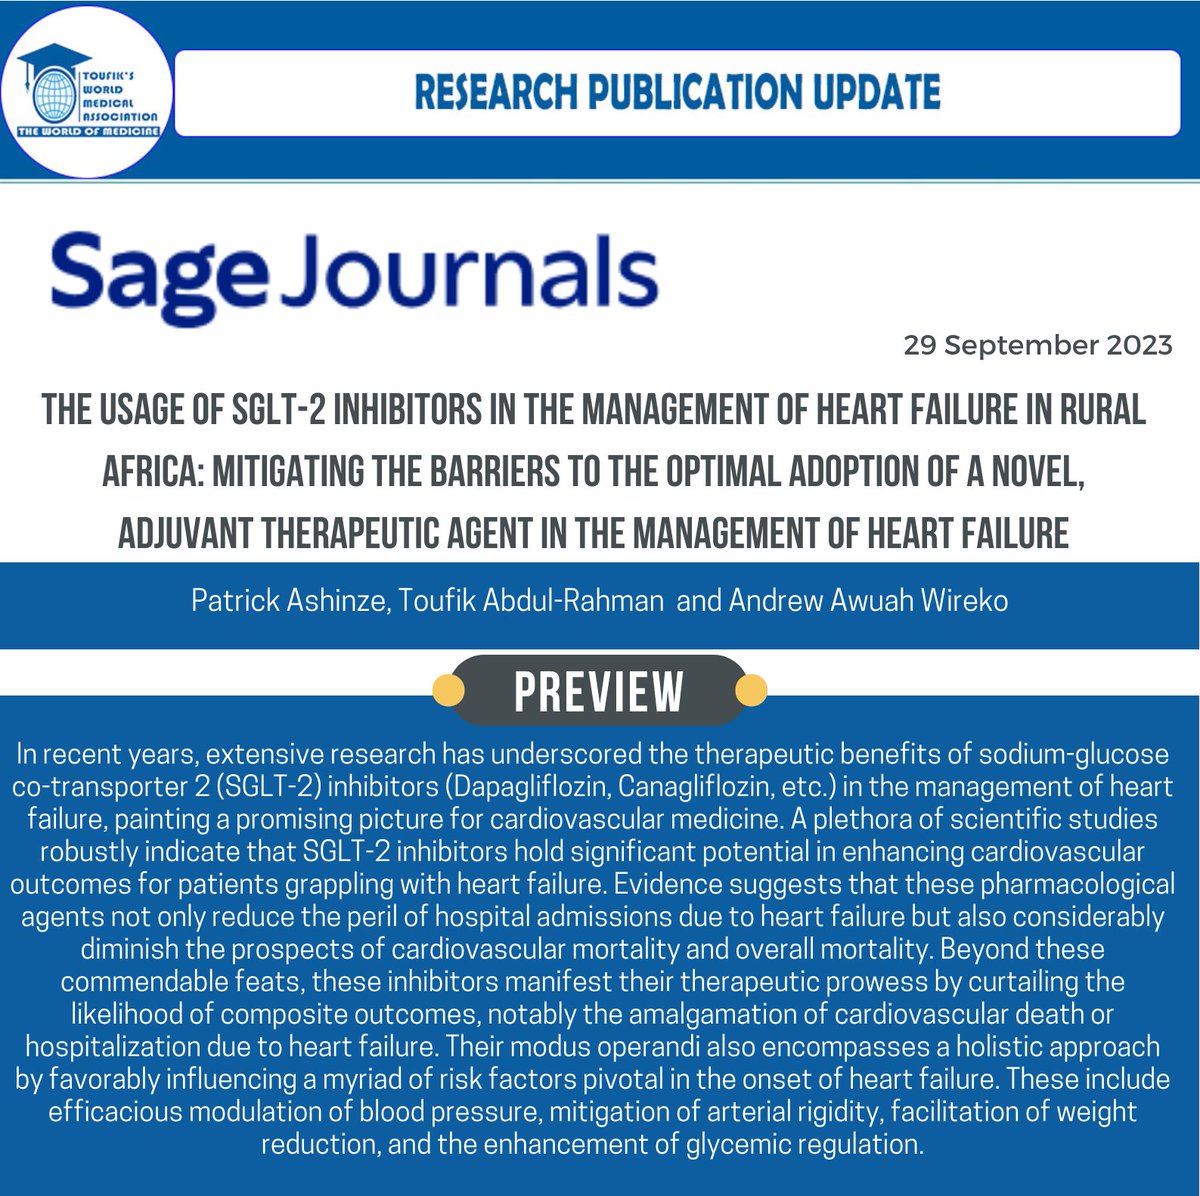 We are highly pleased to share our latest research on“The Usage of SGLT-2 Inhibitors in the Management of Heart Failure in Rural Africa”Published with Sage Journals.
#SGLT2inhibitors #heartfailure #Africa #ruralafrica #managementofheartfailure #research #medicine #pharmacology